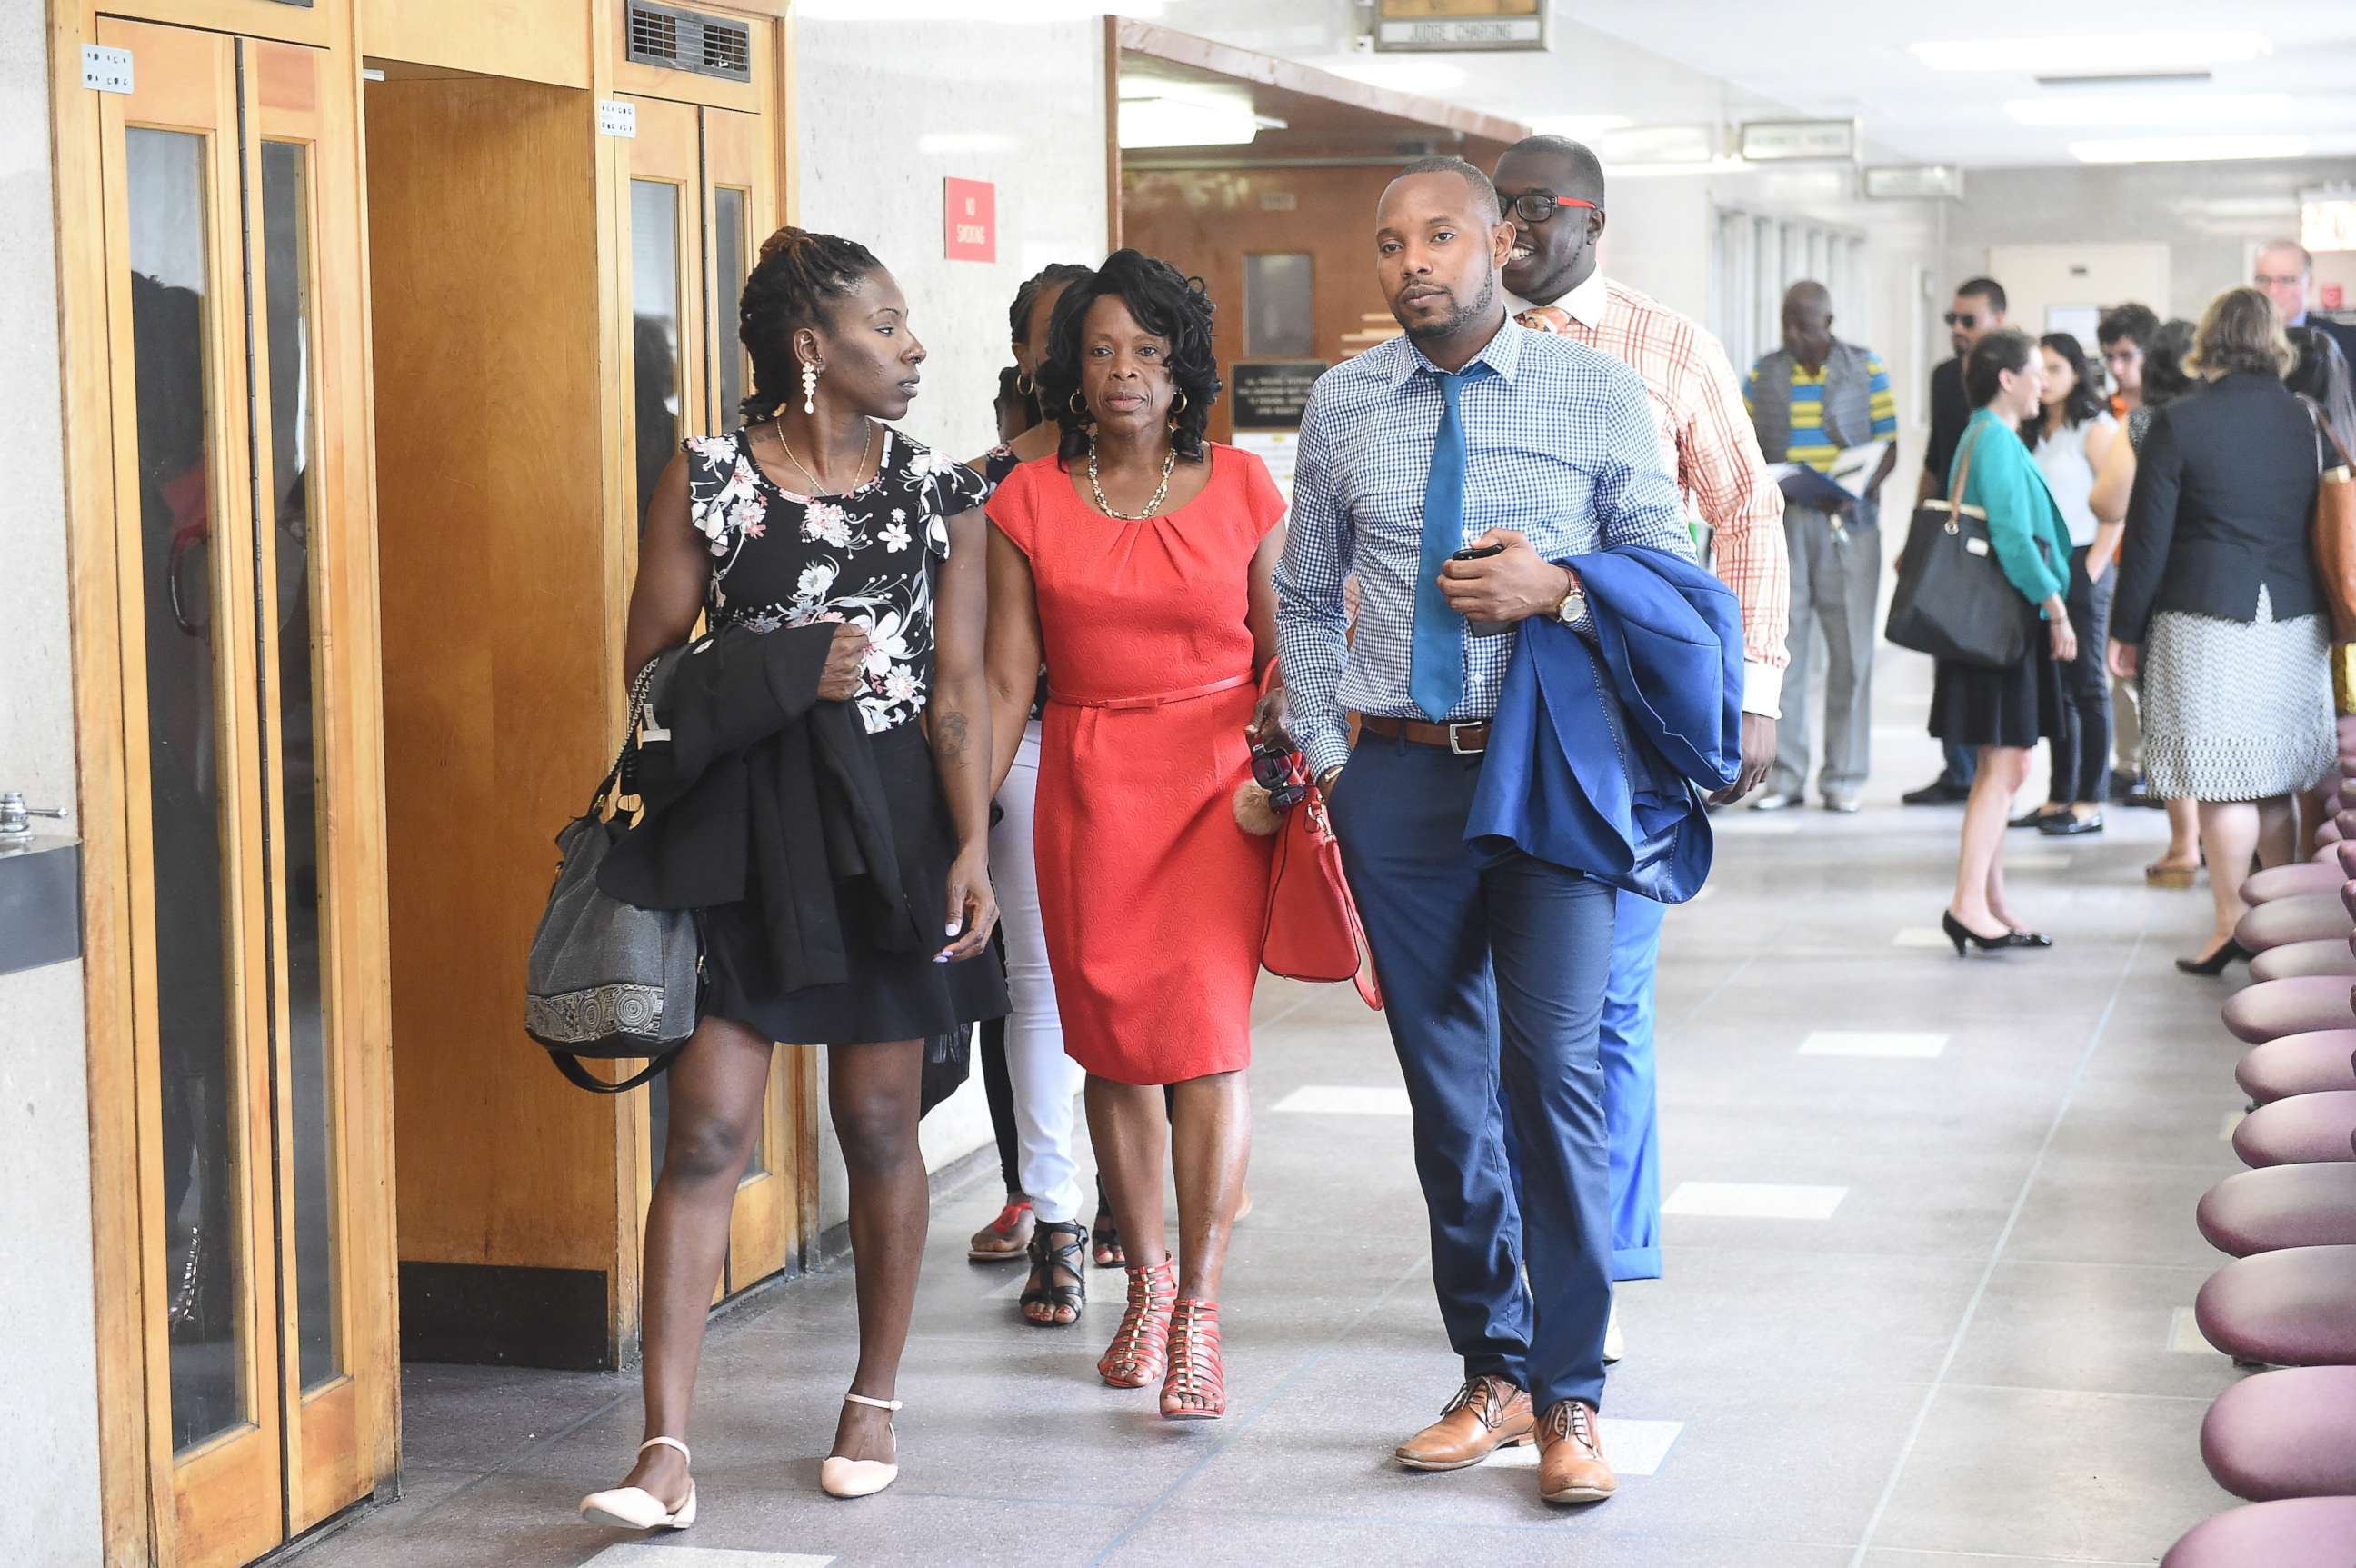 PHOTO: Veta Lewis, center, mother of Chanel Lewis, who was convicted for the murder of Karina Vetrano, leaves the Queens courtroom following a pretrial hearing, July 13, 2017.